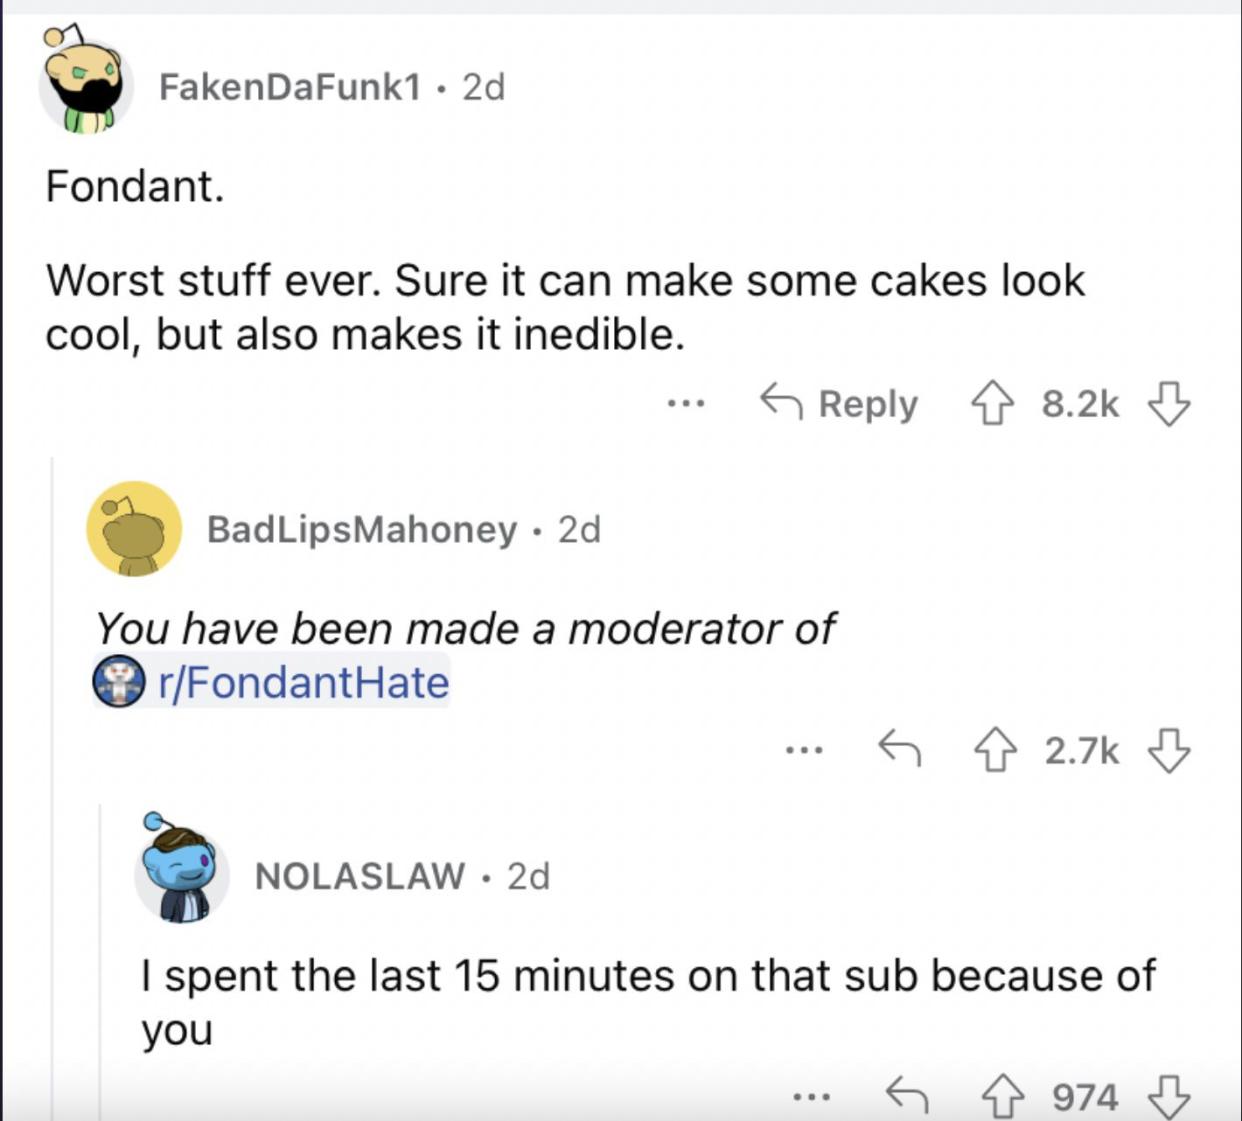 Reddit screenshot from someone who finds Fondant icing to be gross.